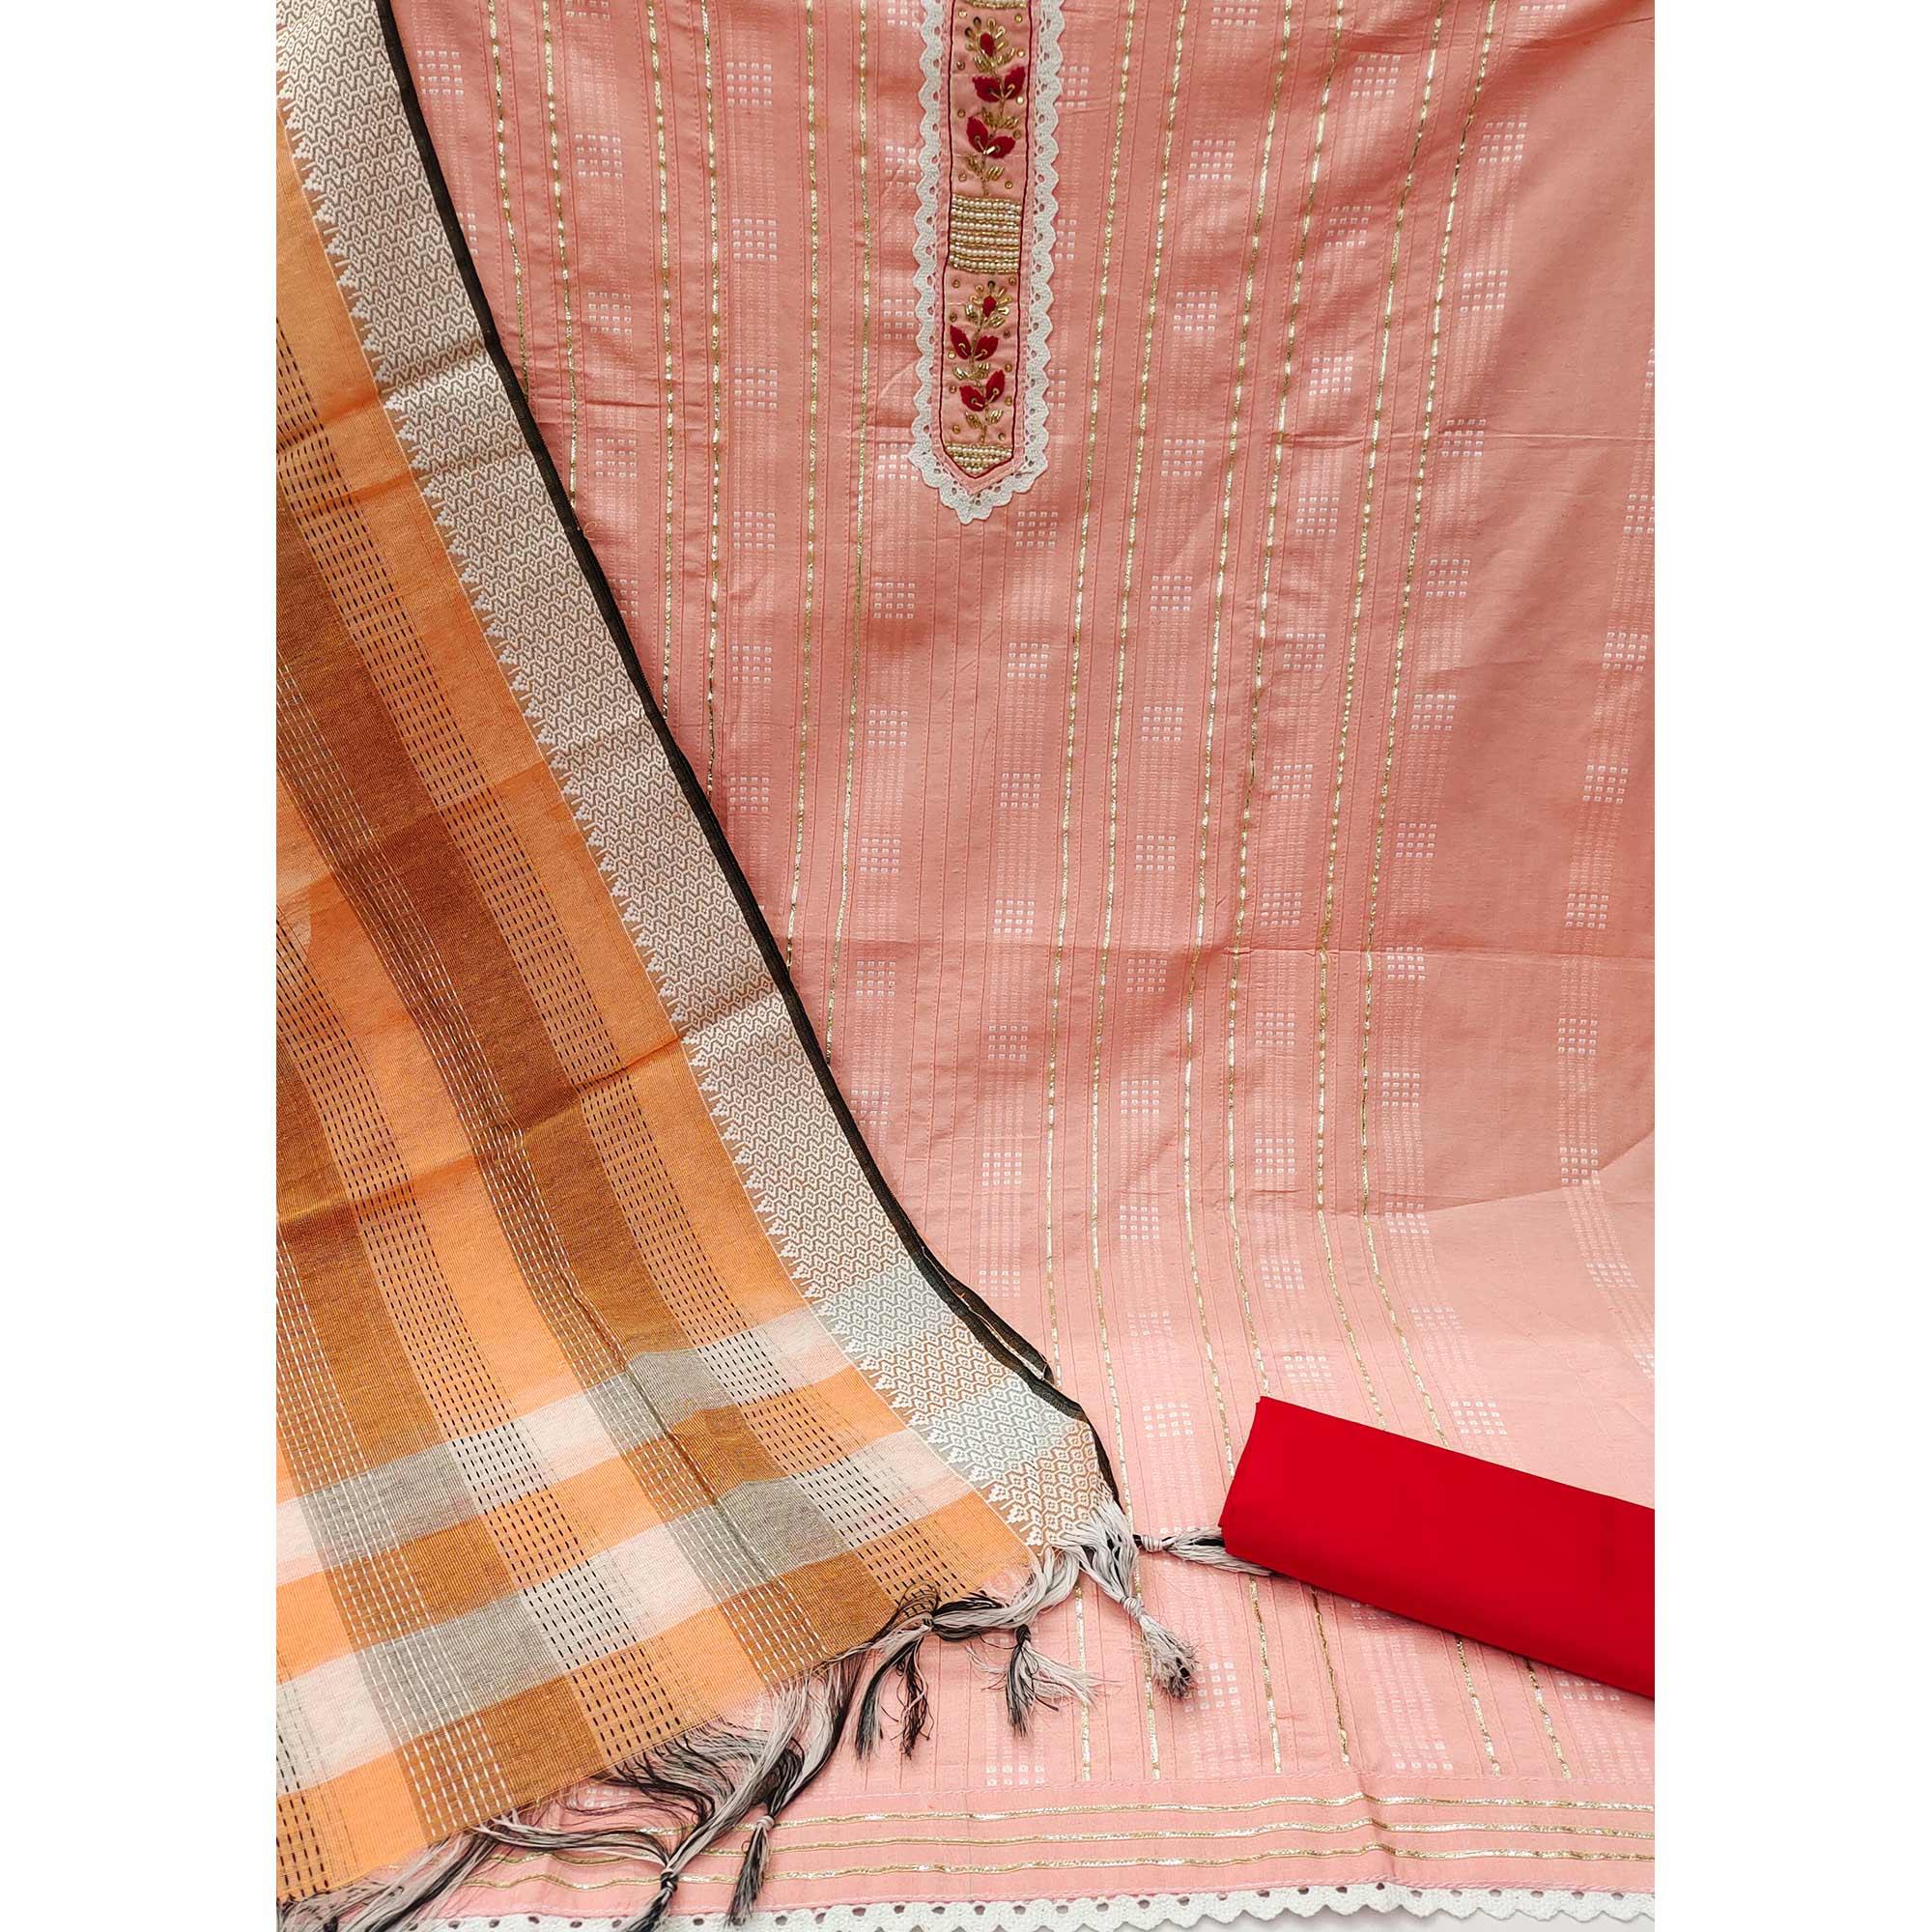 Peach Bandhani Printed With Embellished Poly Cotton Dress Material - Peachmode